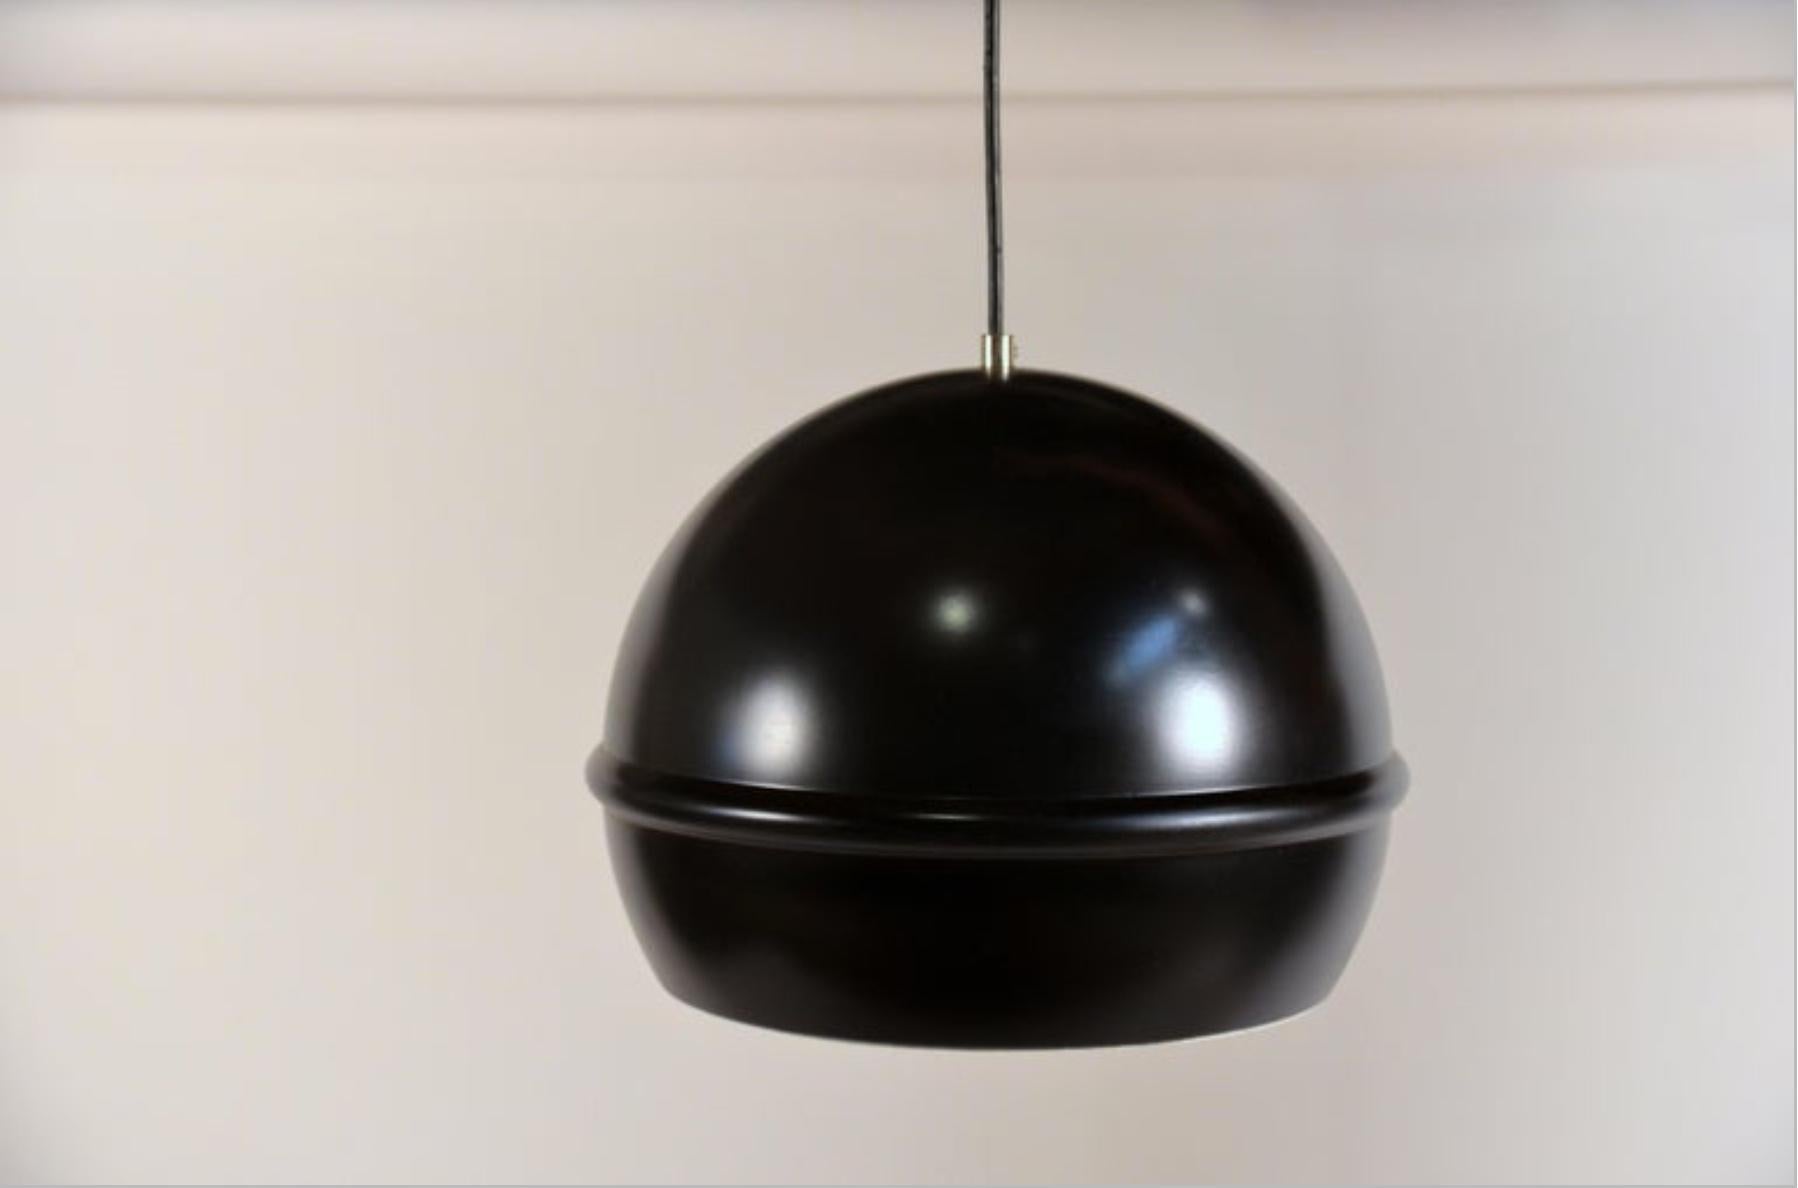 Set of 4 French 1960s black globe pendants. Matching canopies.

Can be installed aligned, in a grid, or in a cluster at different heights.

Perfect with silver- or gold-tipped bulbs.

Priced as a set of 8 but can also be sold